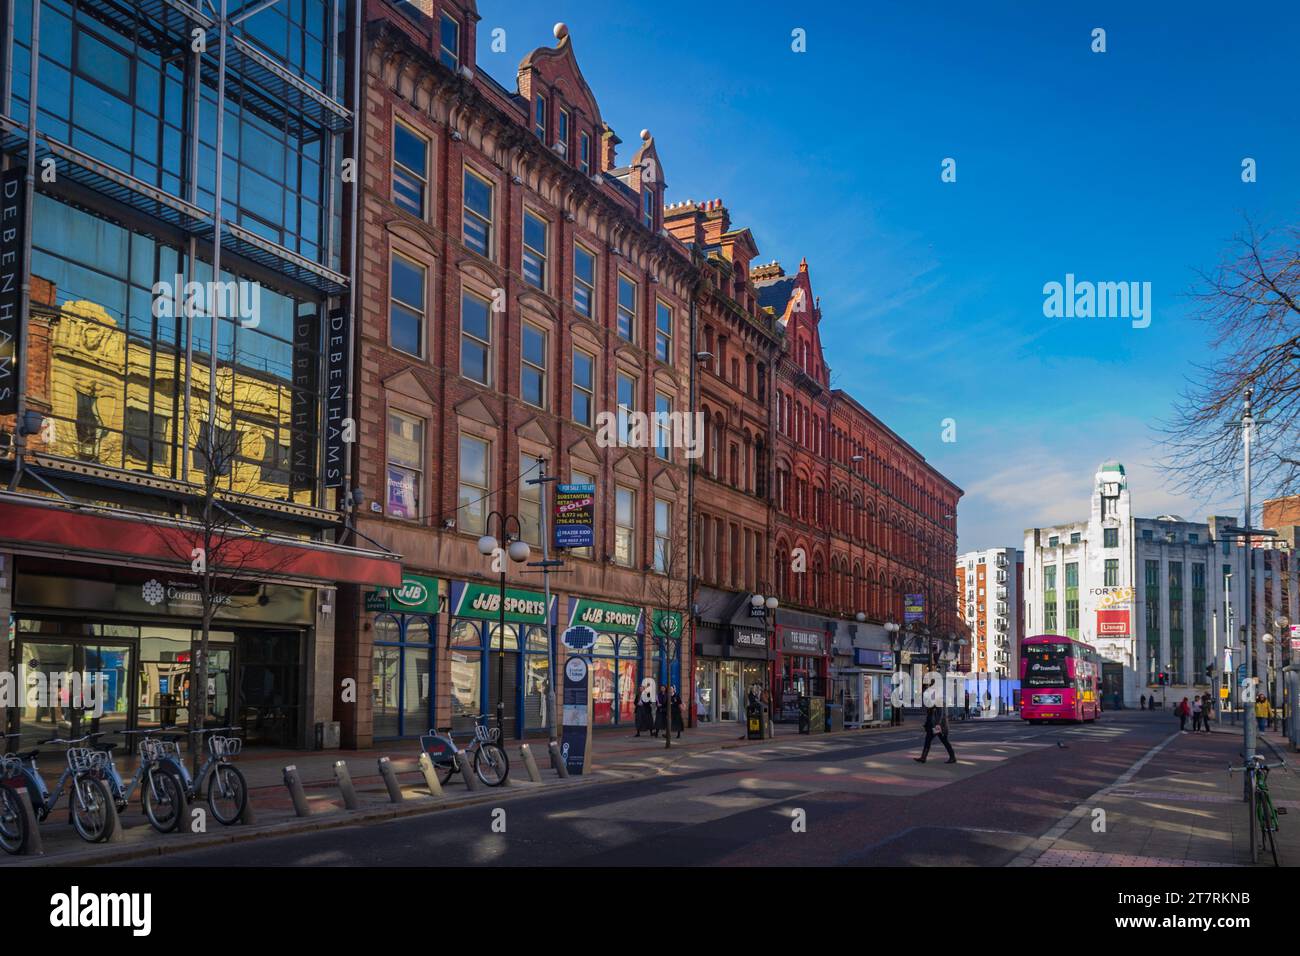 Belfast, County Antrim, Northern Ireland, March 20 2018 - Royal Avenue looking towards the Bank of Ireland building with Belfast Bikes in the foreground Stock Photo